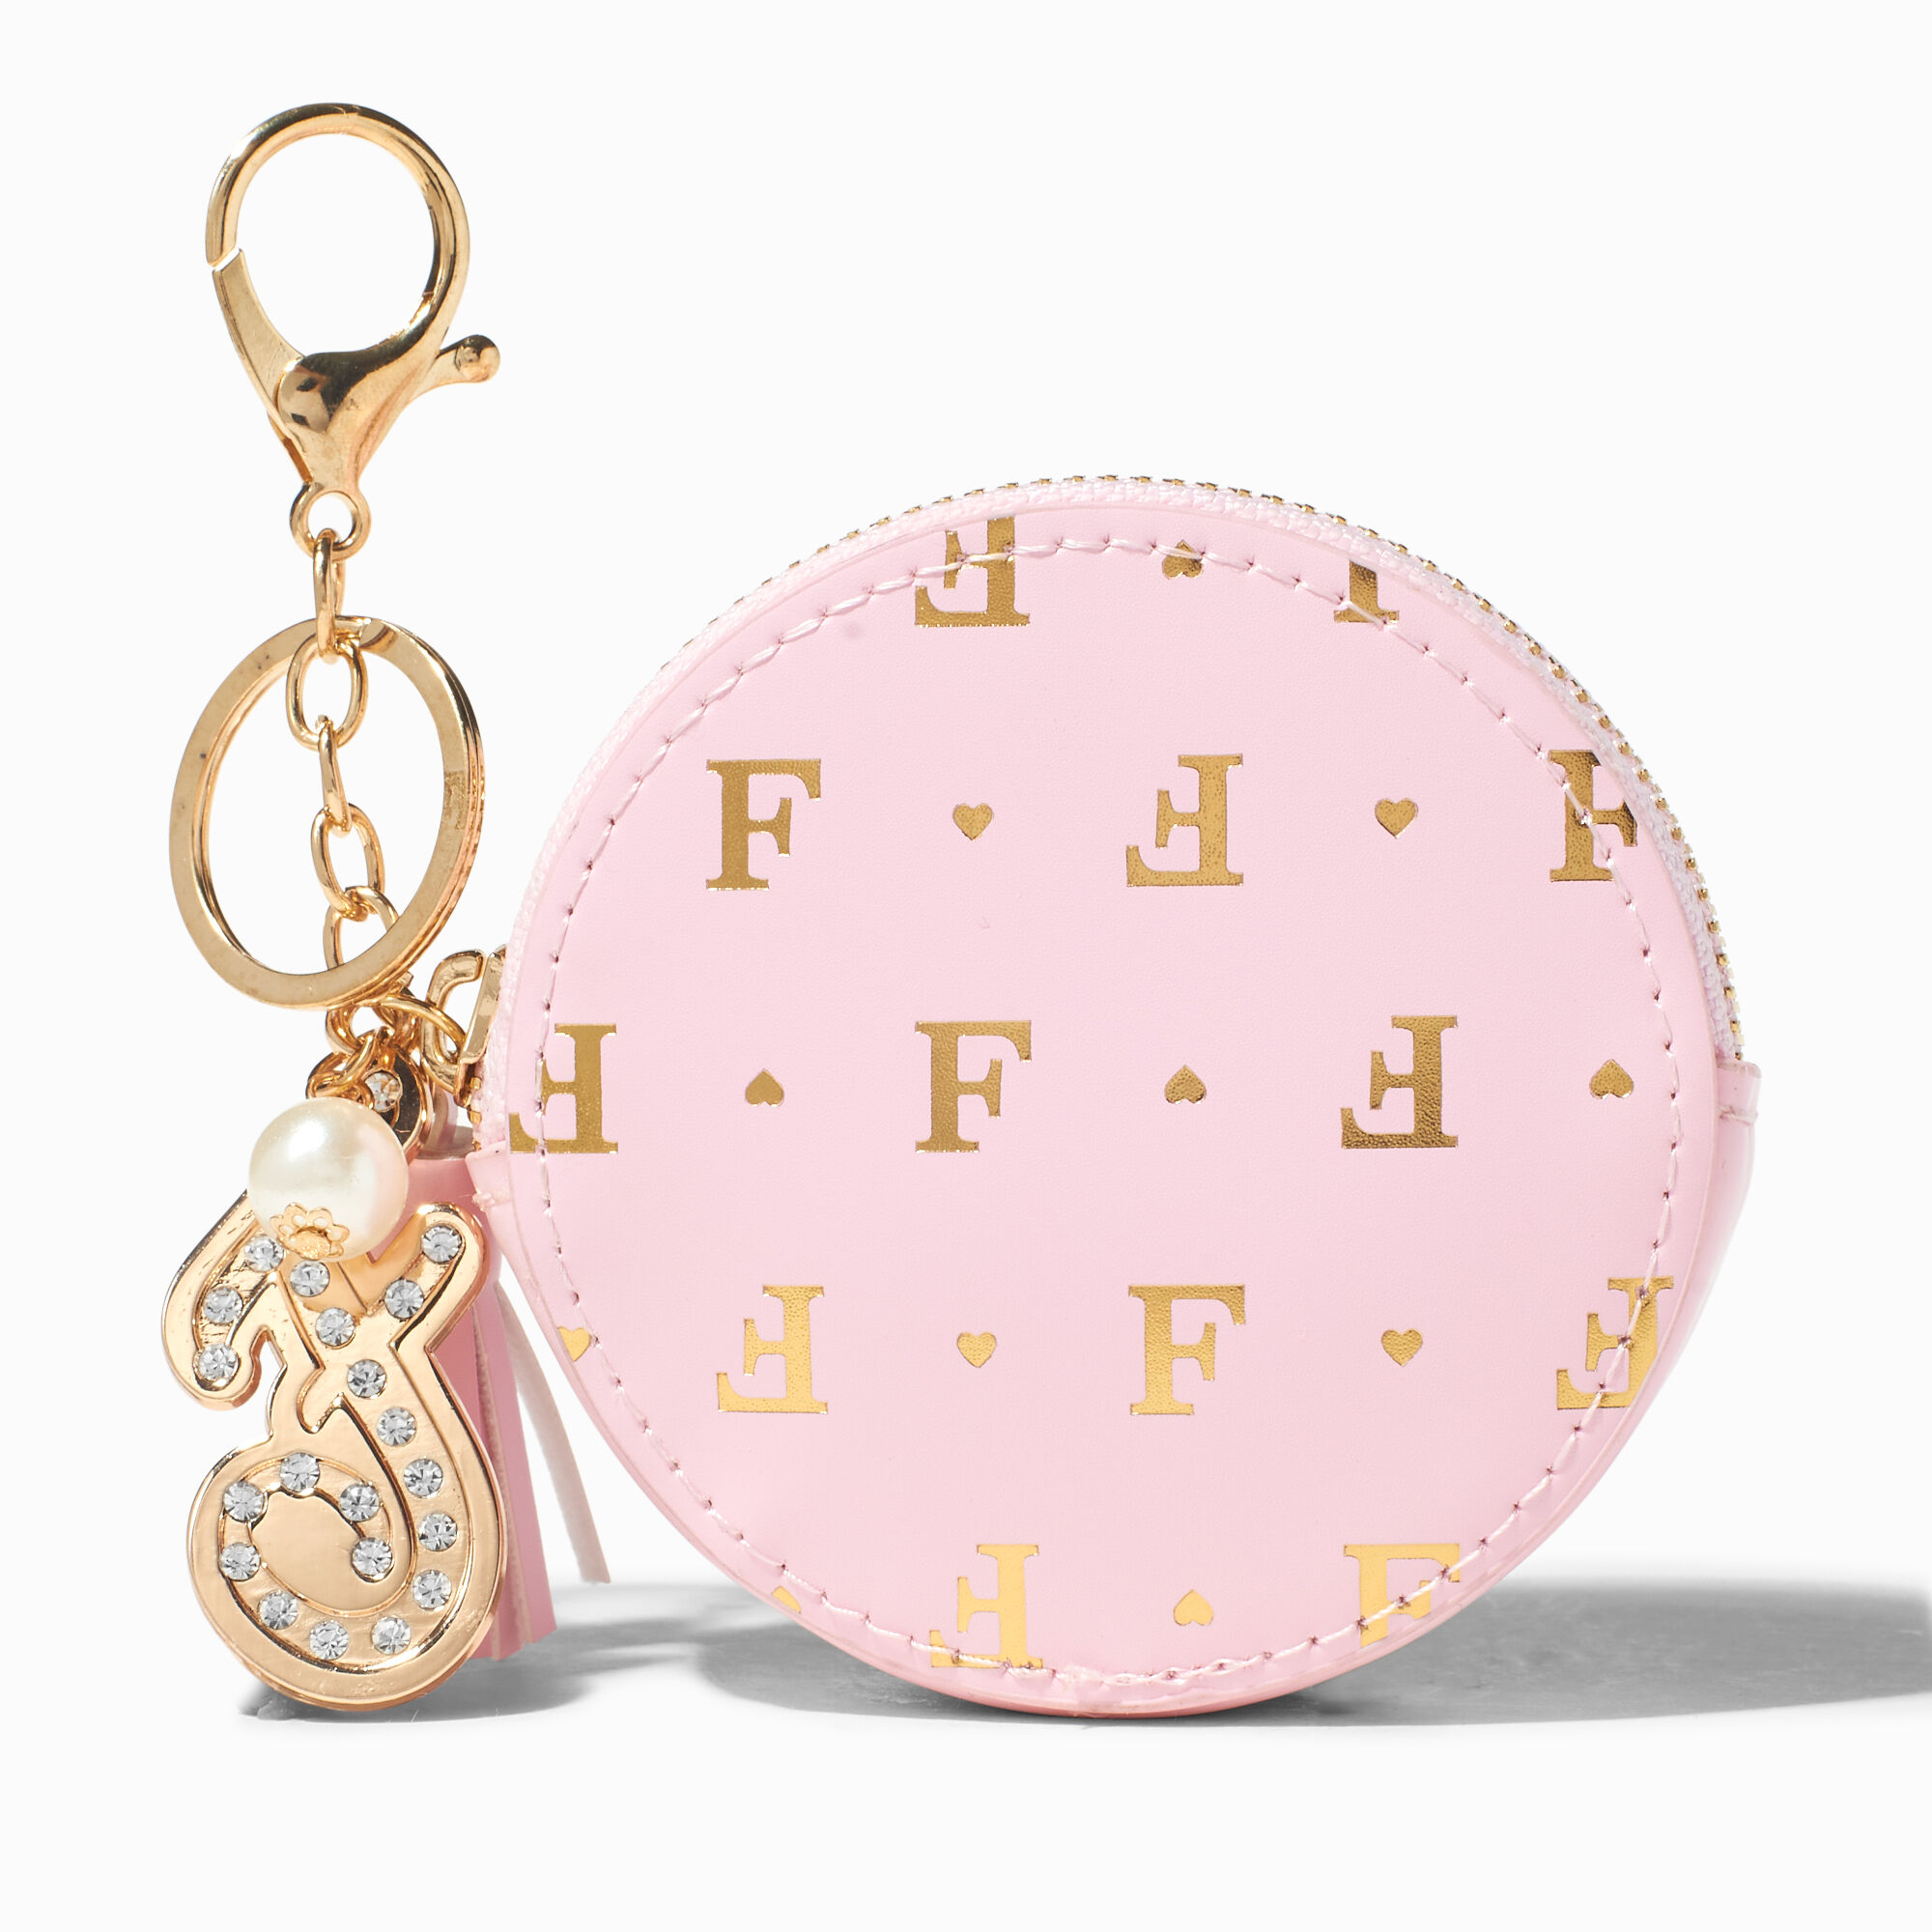 View Claires en Initial Coin Purse F Gold information